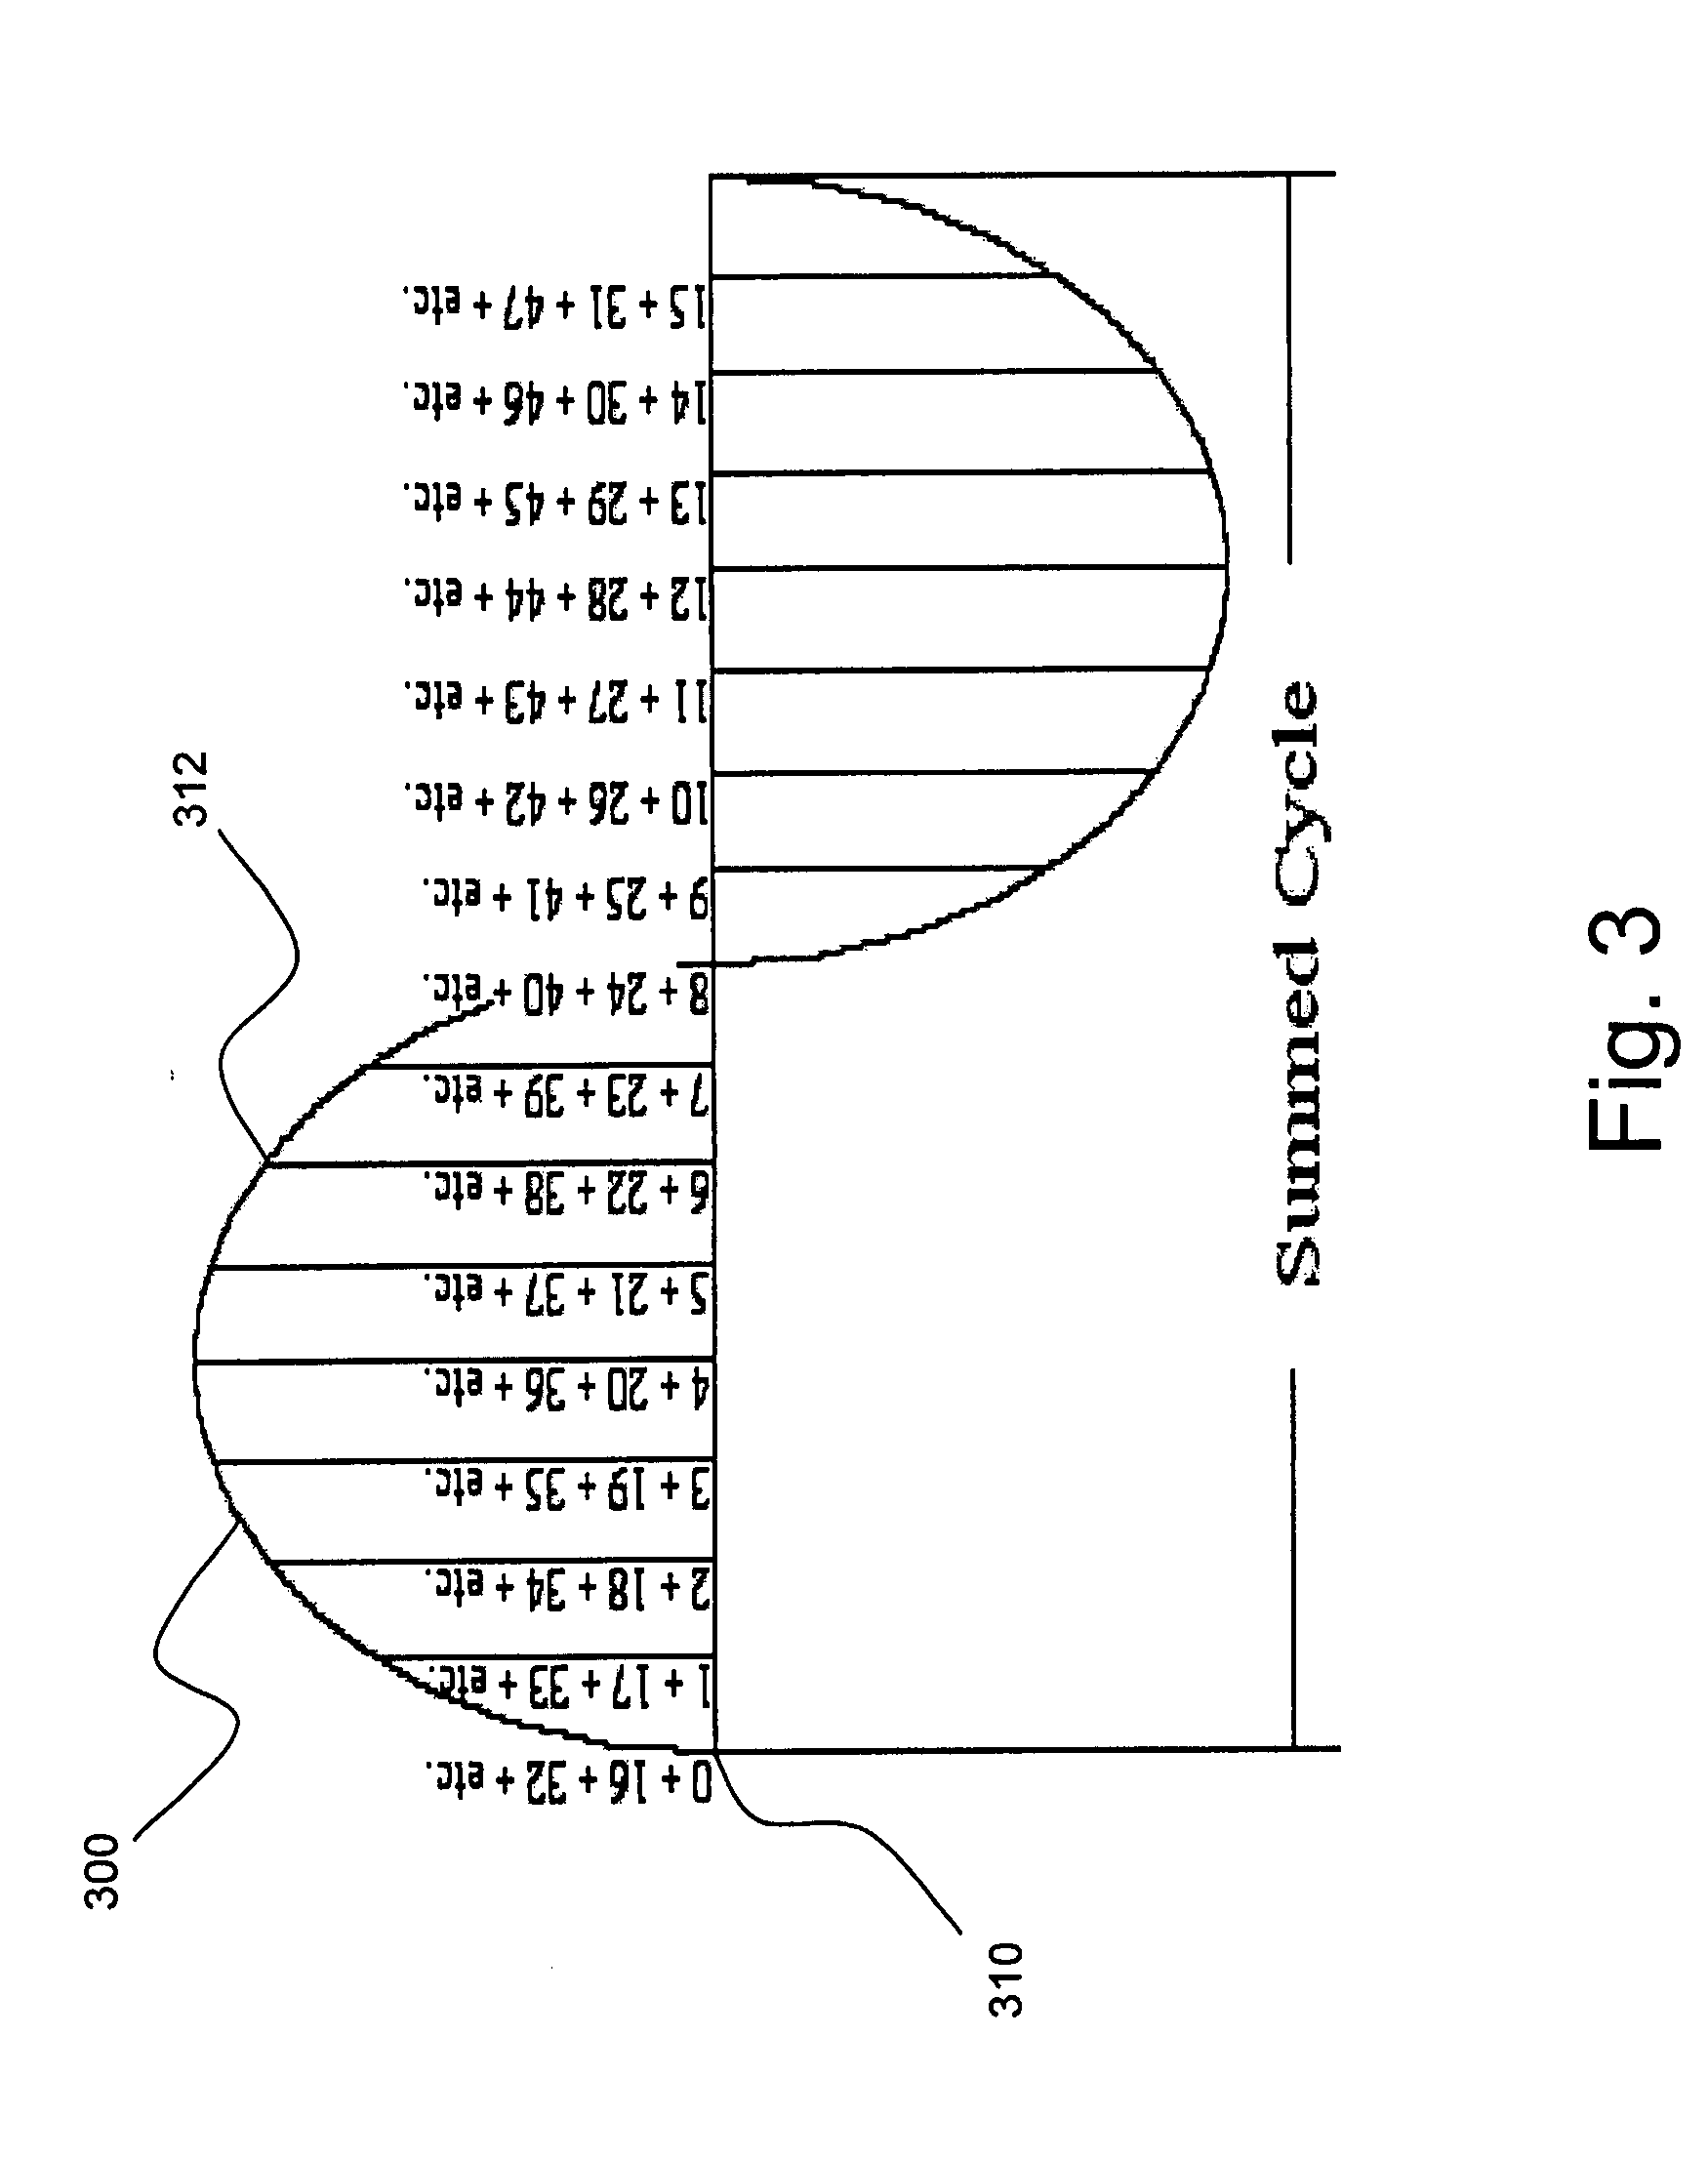 Filtering techniques to remove noise from a periodic signal and Irms calculations